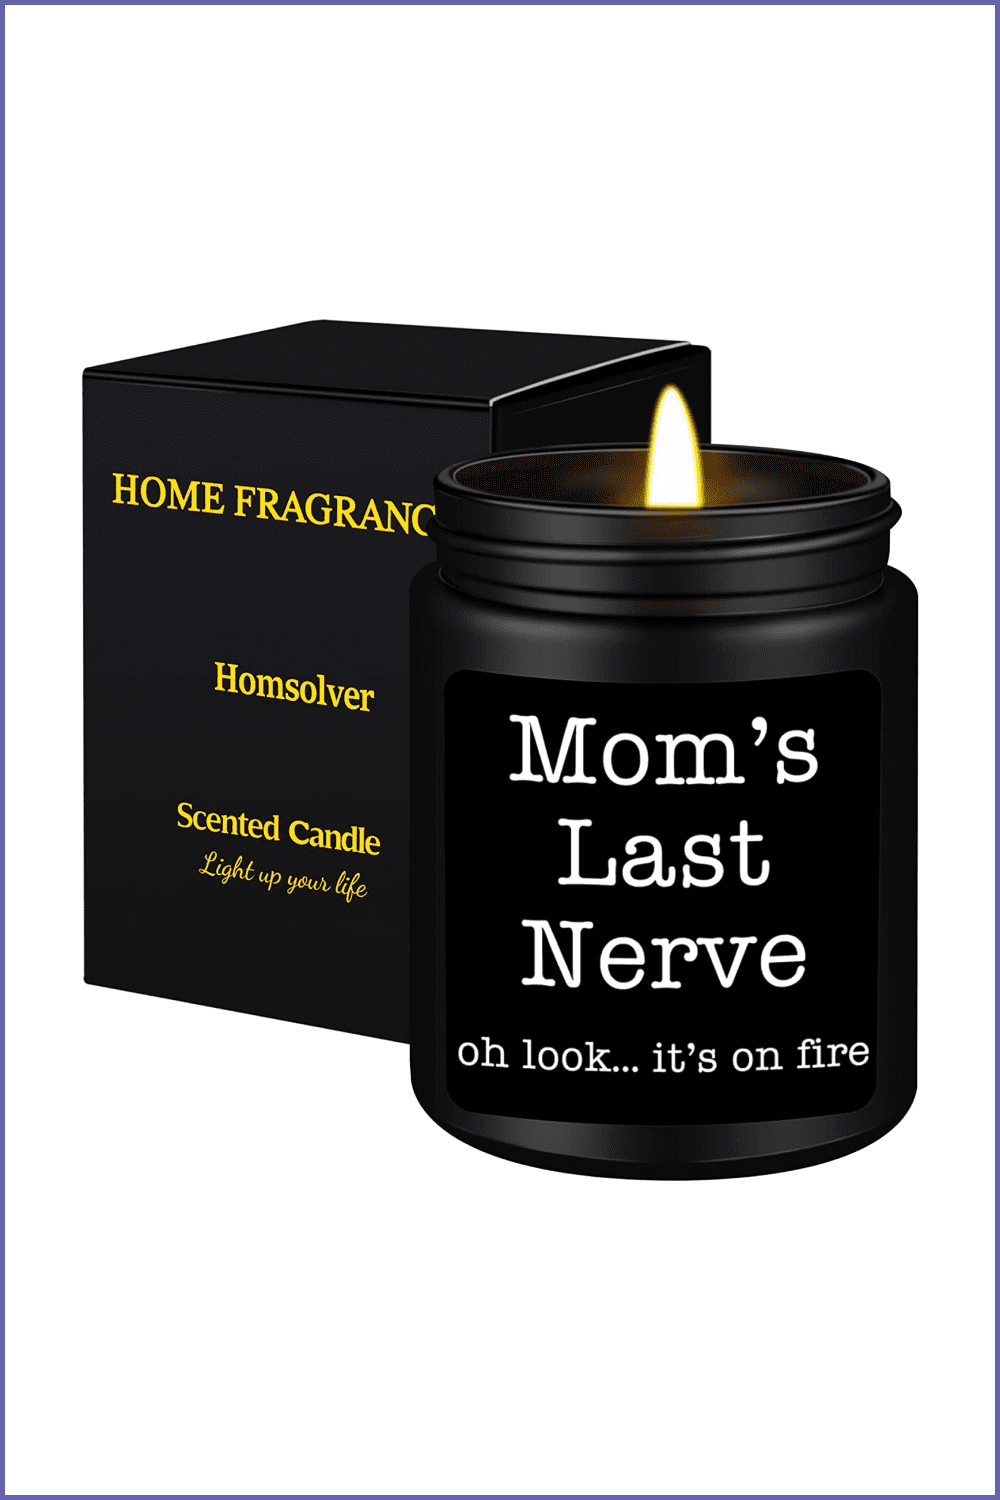 Photo of a black jar of candles with a white inscription and a black packaging box.